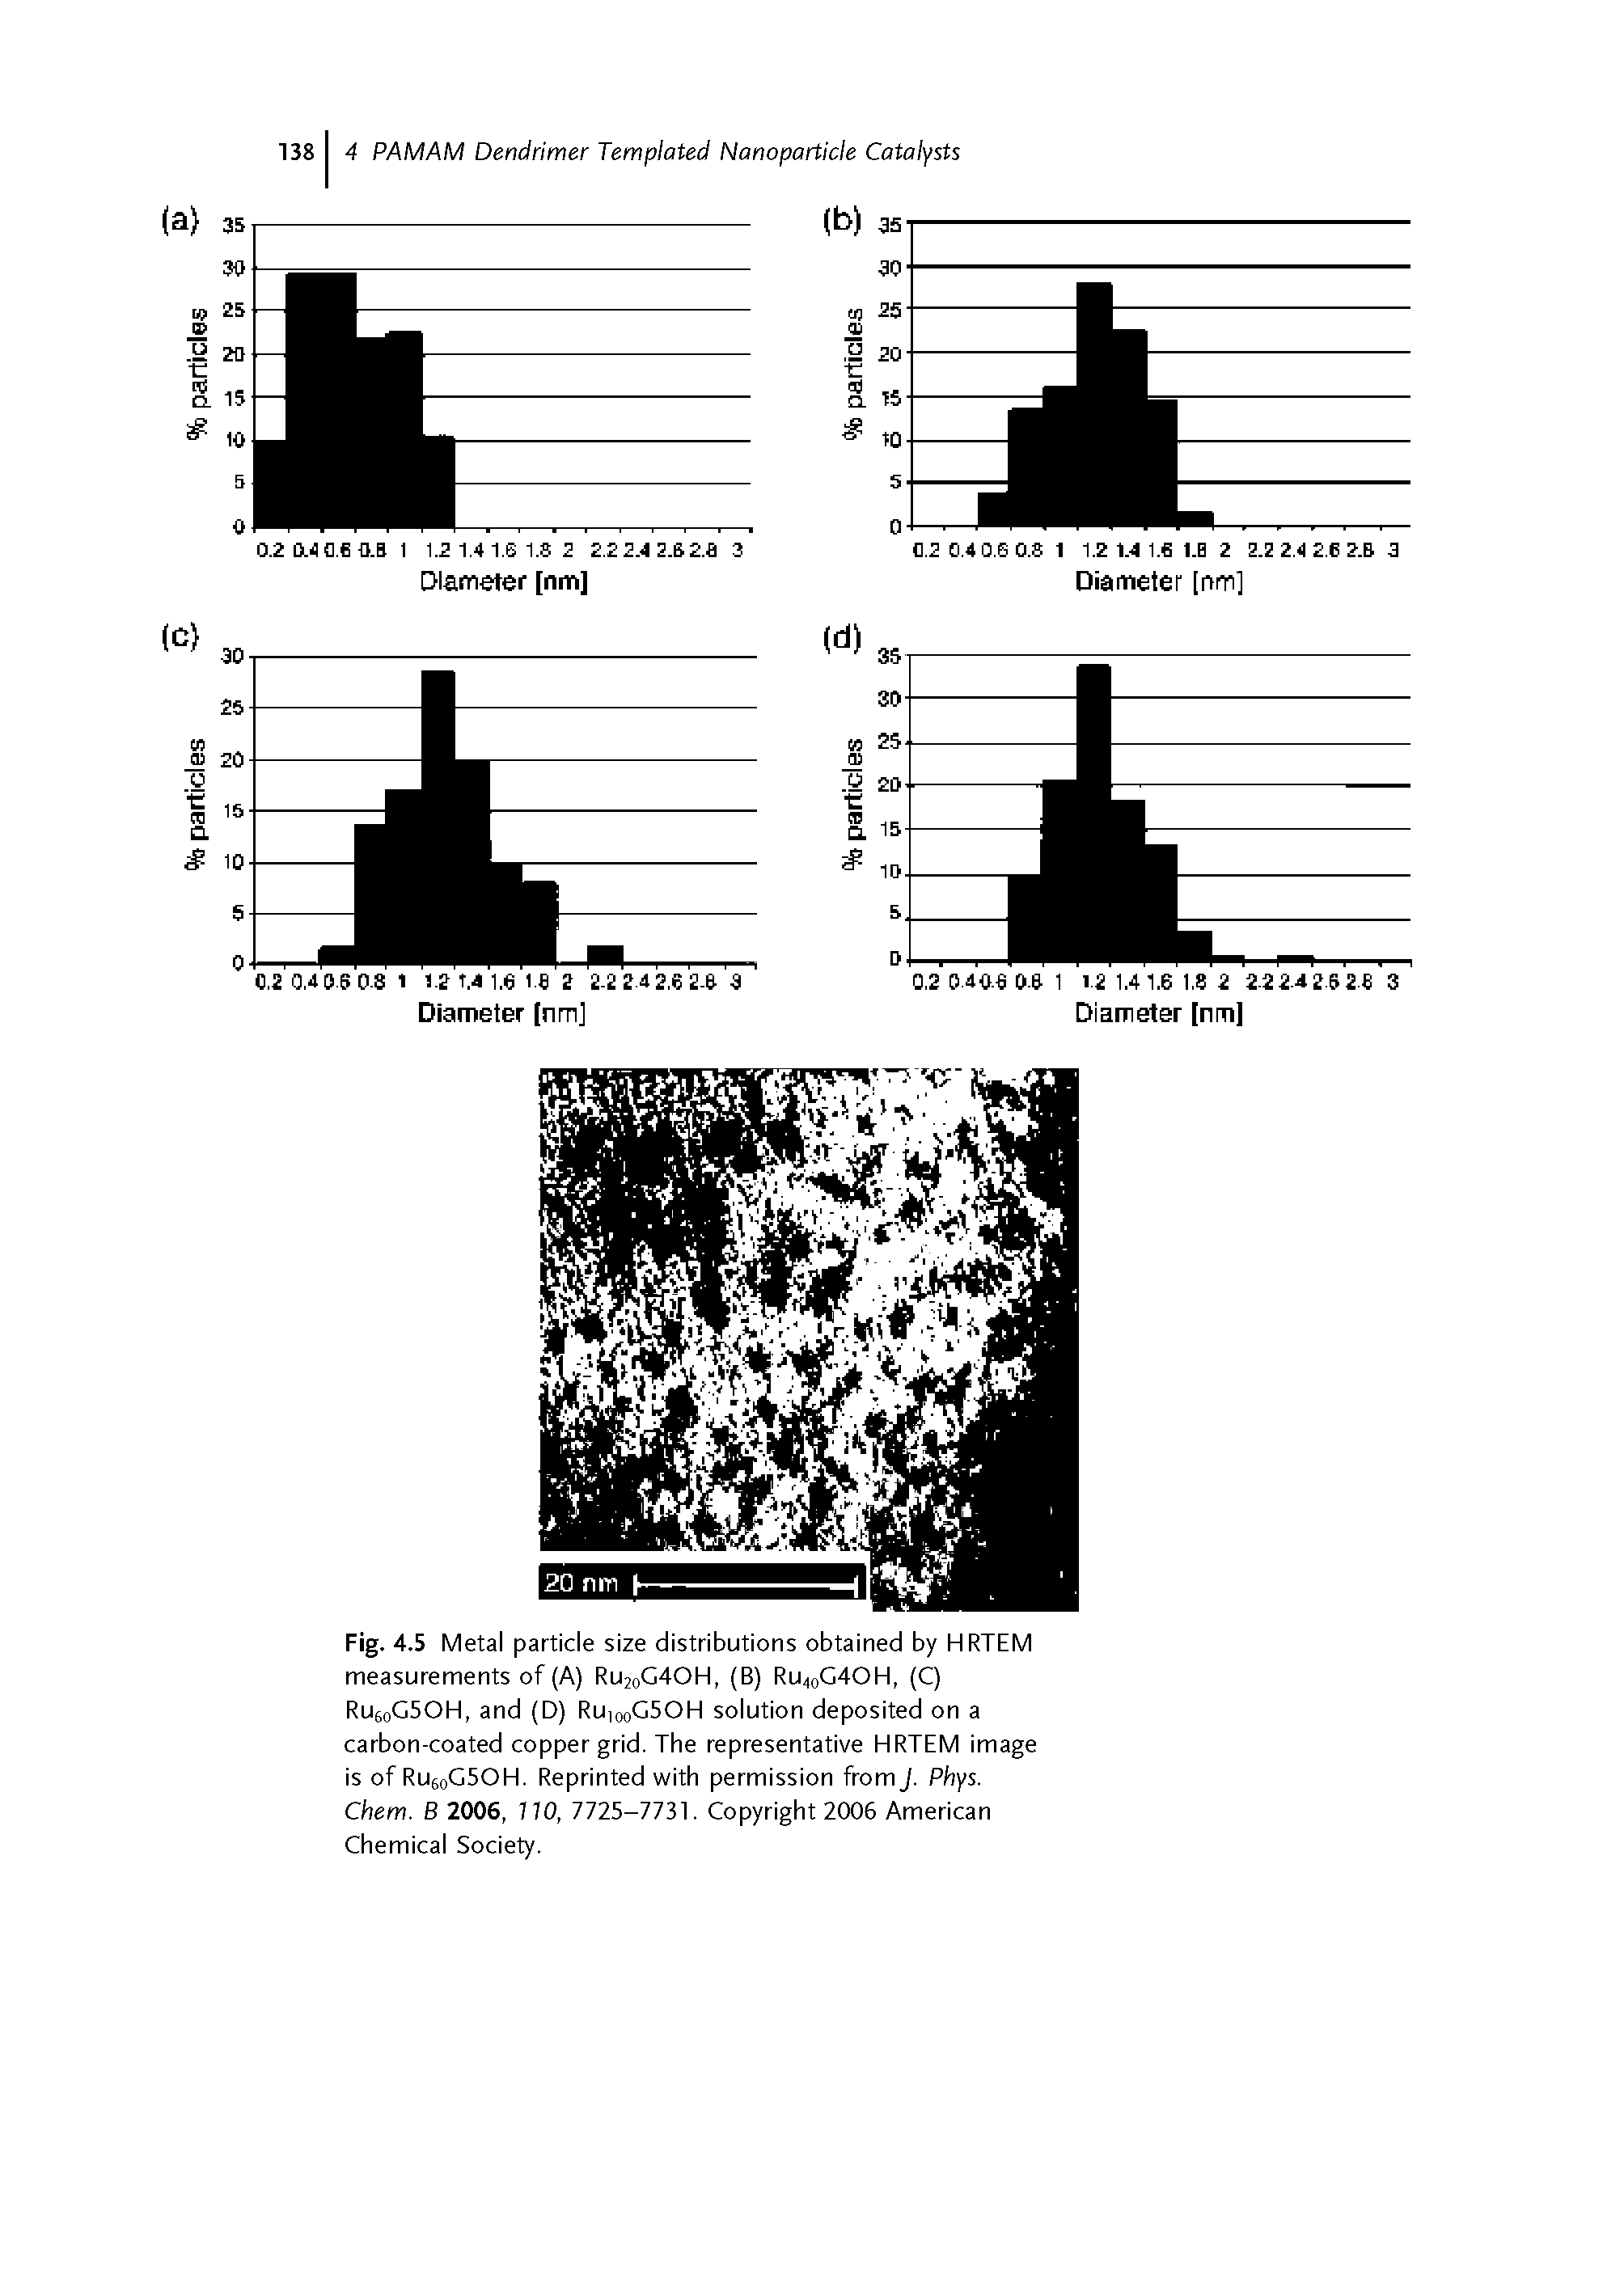 Fig. 4.5 Metal particle size distributions obtained by HRTEM measurements of (A) Ru2oG40H, (B) RU40G4OH, (C) RusoGSOH, and (D) RuiooGSOH solution deposited on a carbon-coated copper grid. The representative HRTEM image is of RusoGSOH. Reprinted with permission from J. Phys. Chem. B 2006, 770, 1123-113 . Copyright 2006 American Chemical Society.